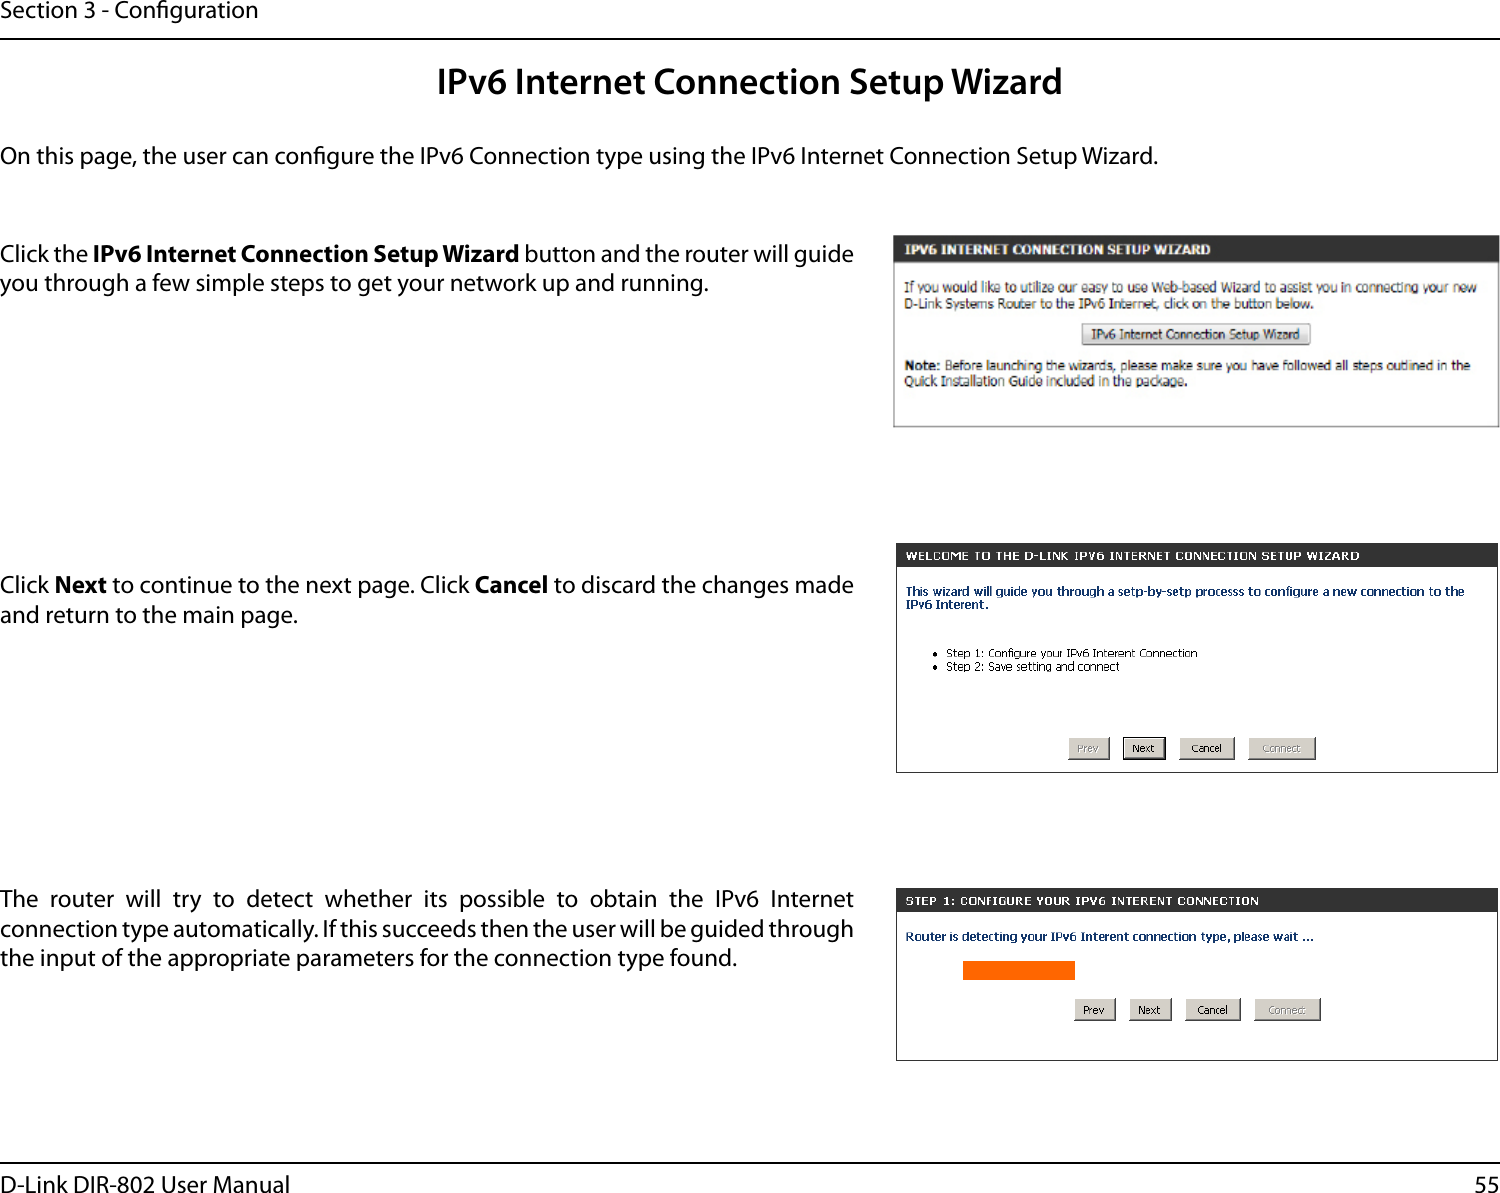 55D-Link DIR-802 User ManualSection 3 - CongurationIPv6 Internet Connection Setup WizardOn this page, the user can congure the IPv6 Connection type using the IPv6 Internet Connection Setup Wizard.Click the IPv6 Internet Connection Setup Wizard button and the router will guide you through a few simple steps to get your network up and running.Click Next to continue to the next page. Click Cancel to discard the changes made and return to the main page.The  router  will  try  to  detect  whether  its  possible  to  obtain  the  IPv6  Internet connection type automatically. If this succeeds then the user will be guided through the input of the appropriate parameters for the connection type found.